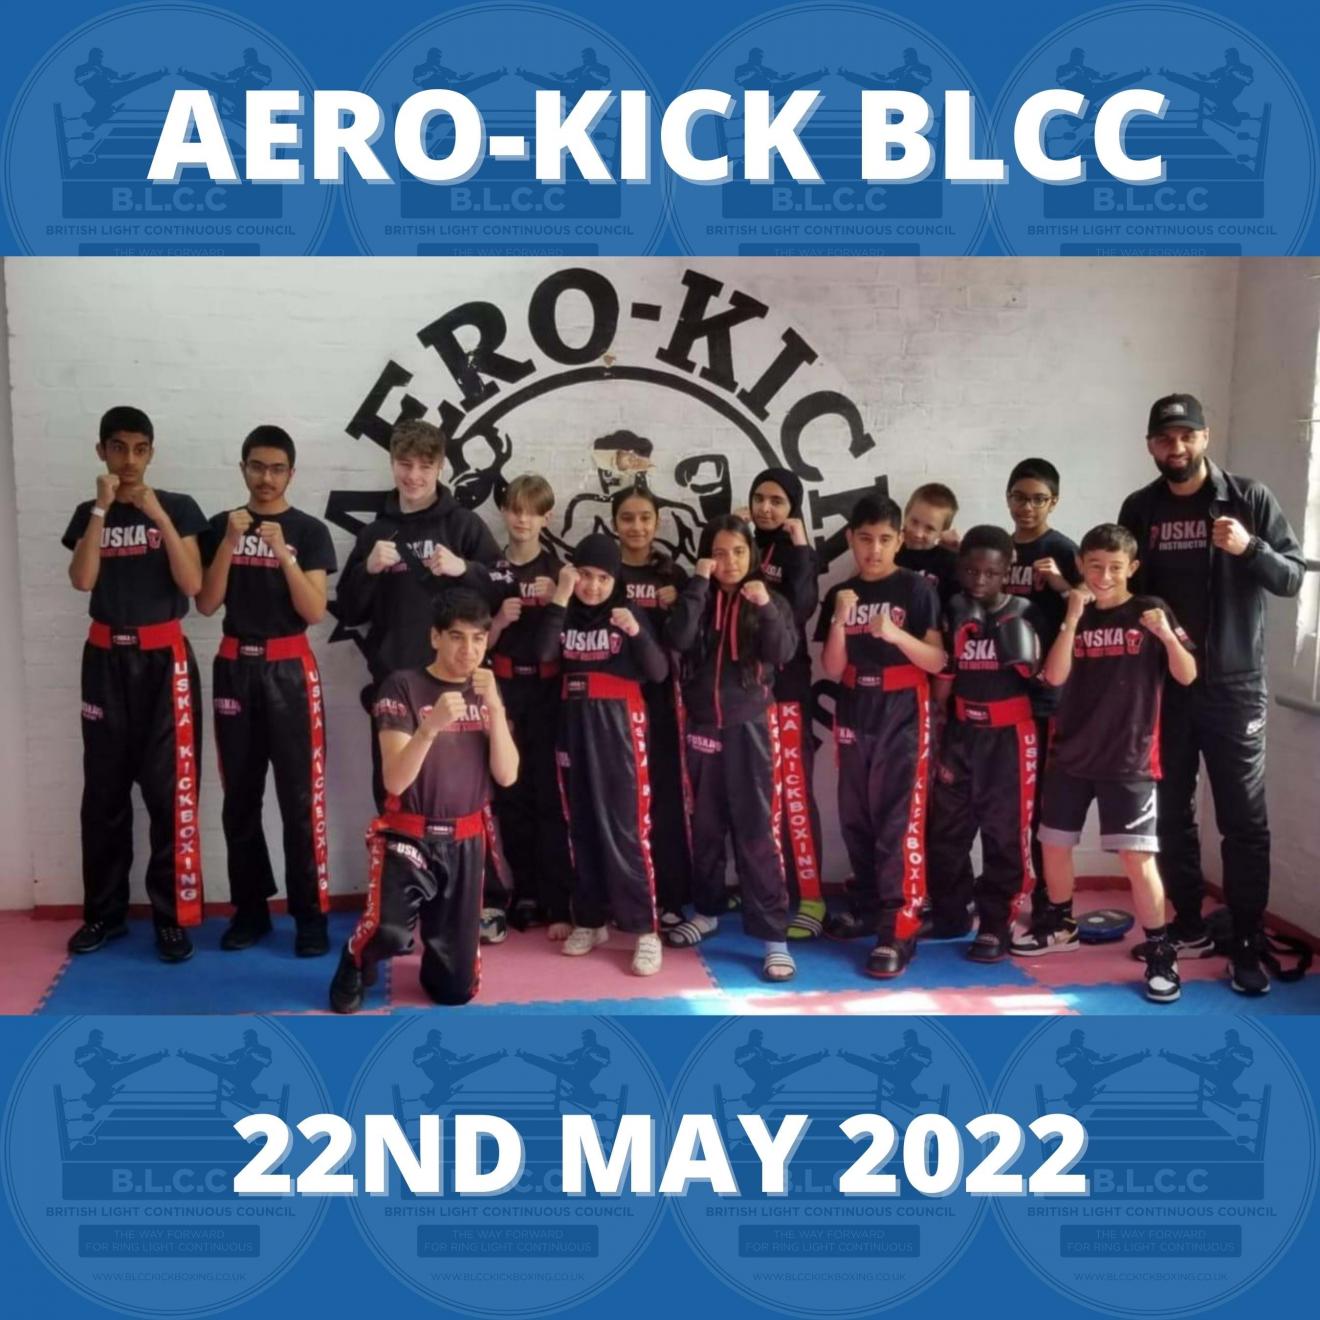 22-05-22 - 17 USKA fighters compete at the May Aero-Kick BLCC event!